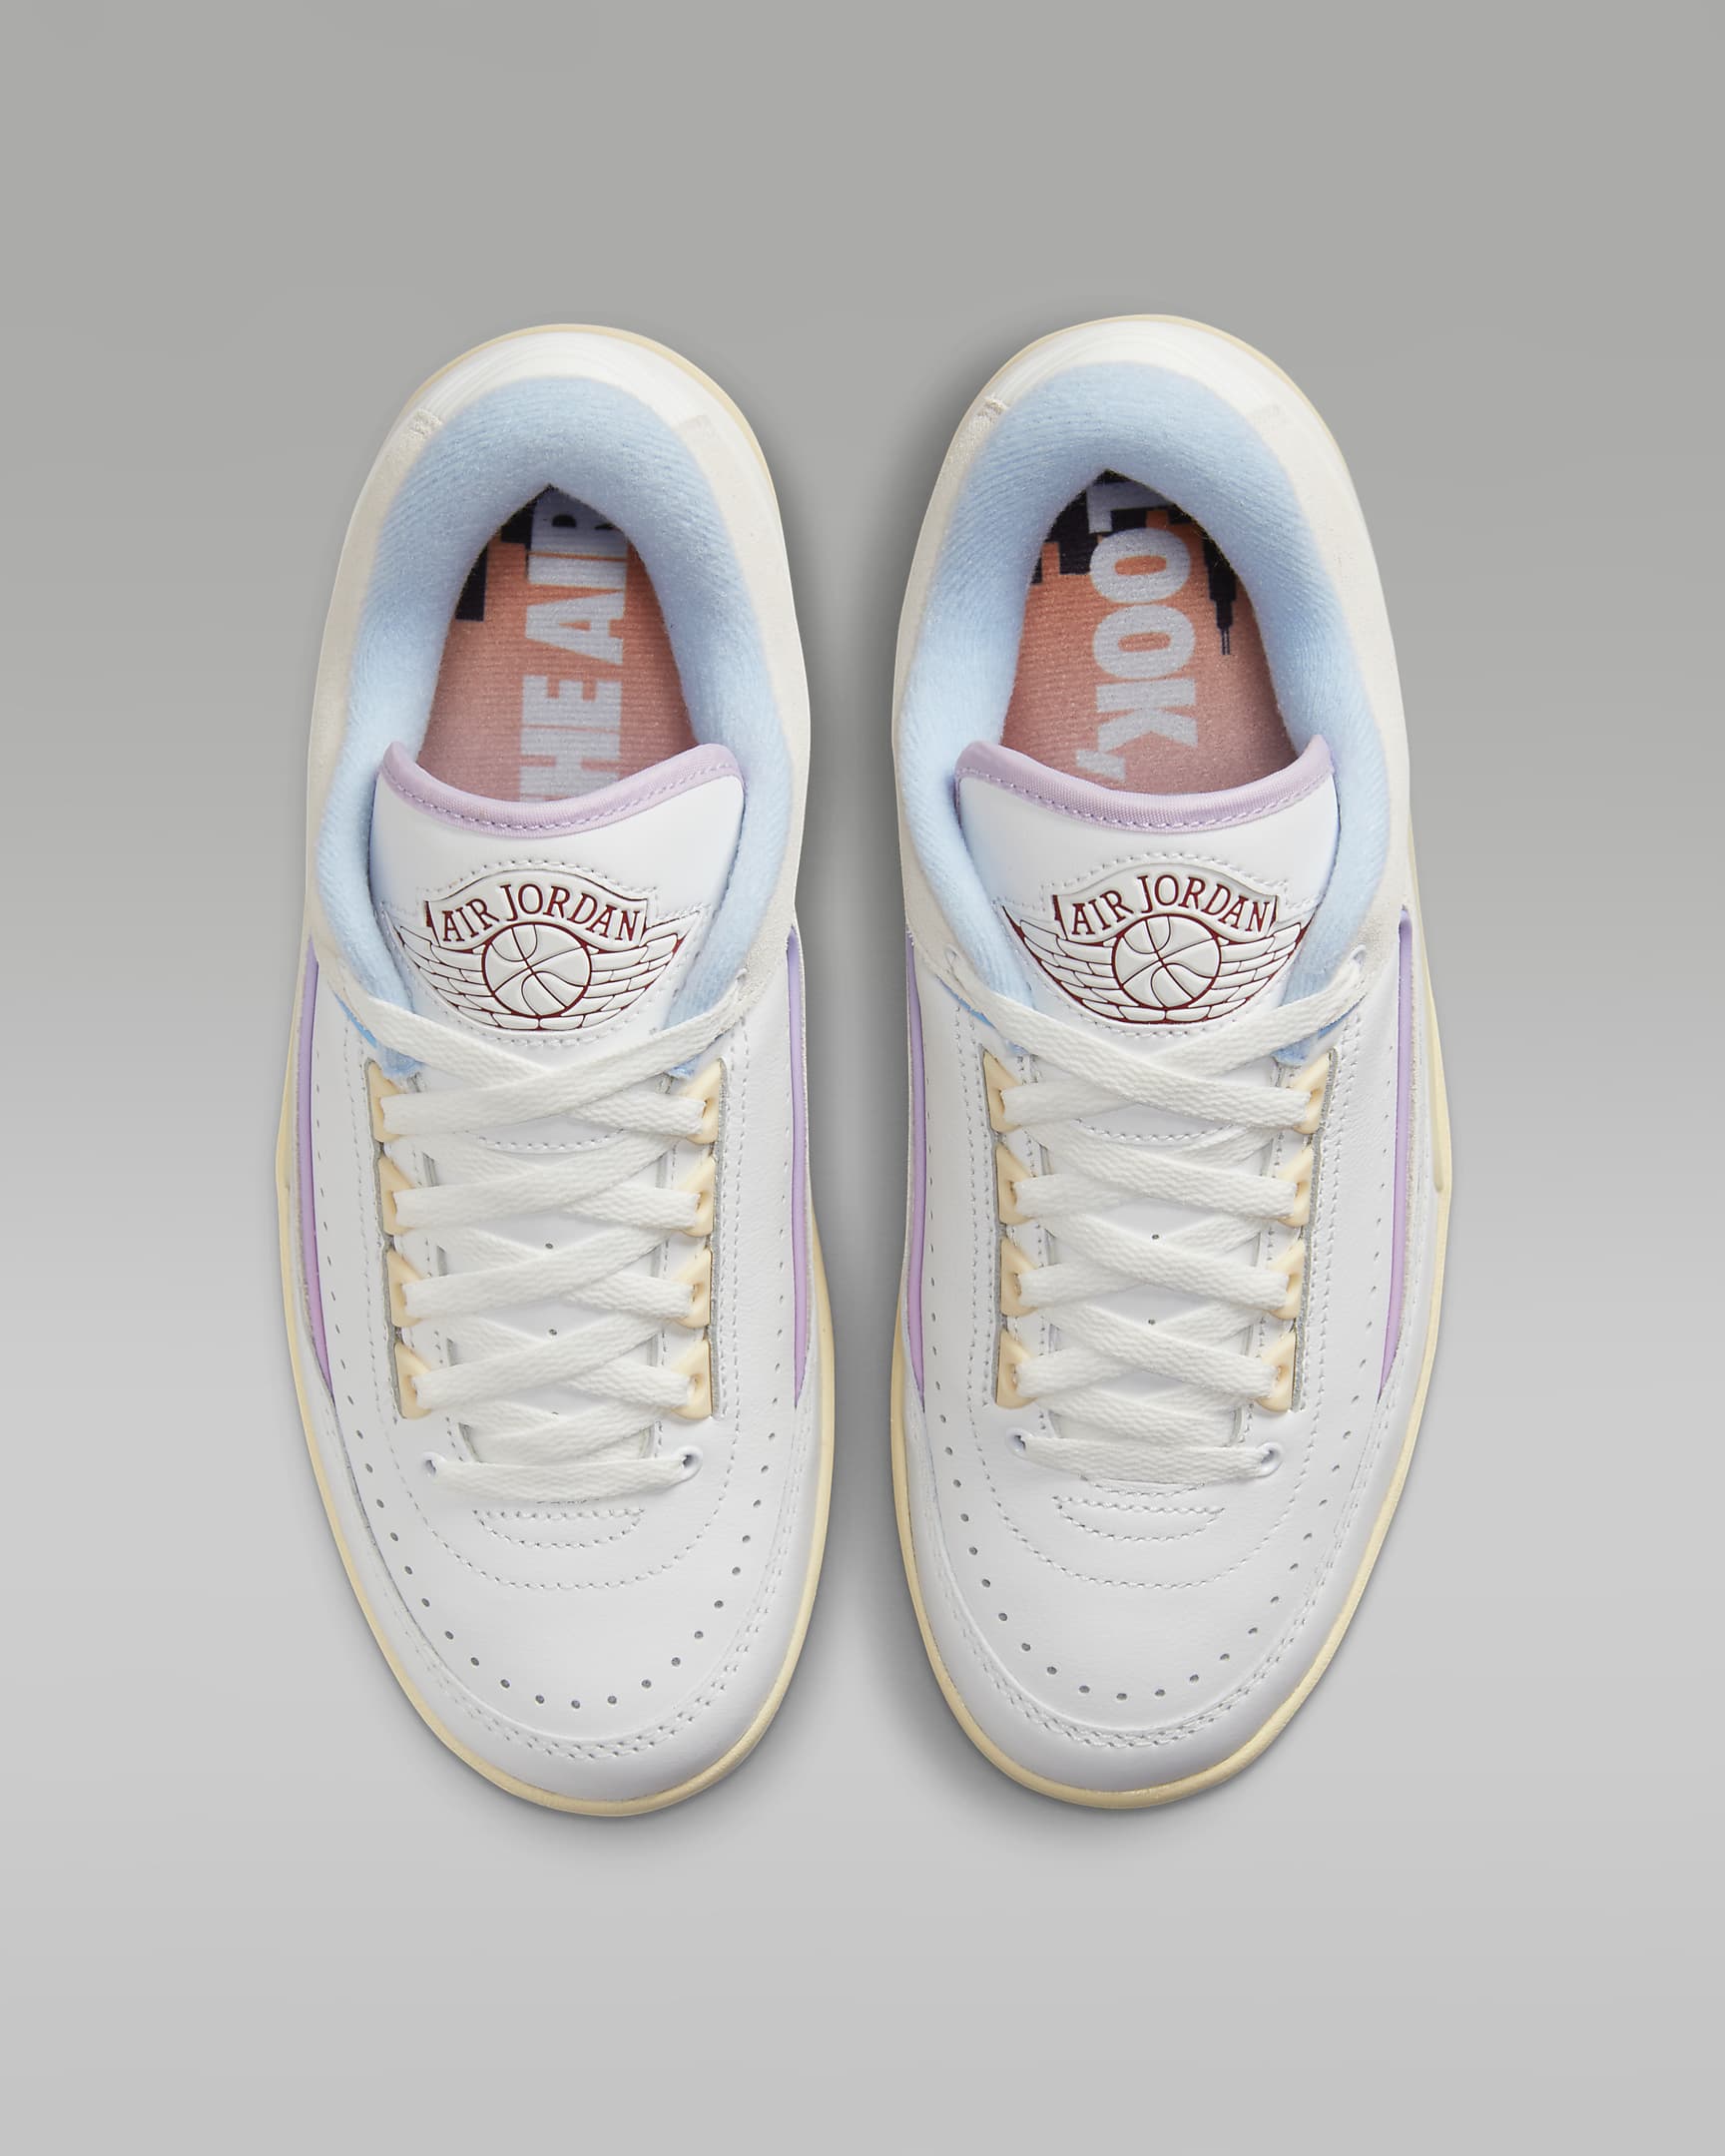 Unbelievable! Air Jordan 2 Retro Low Women’s Shoes Review – Is This the Perfect Sneaker?